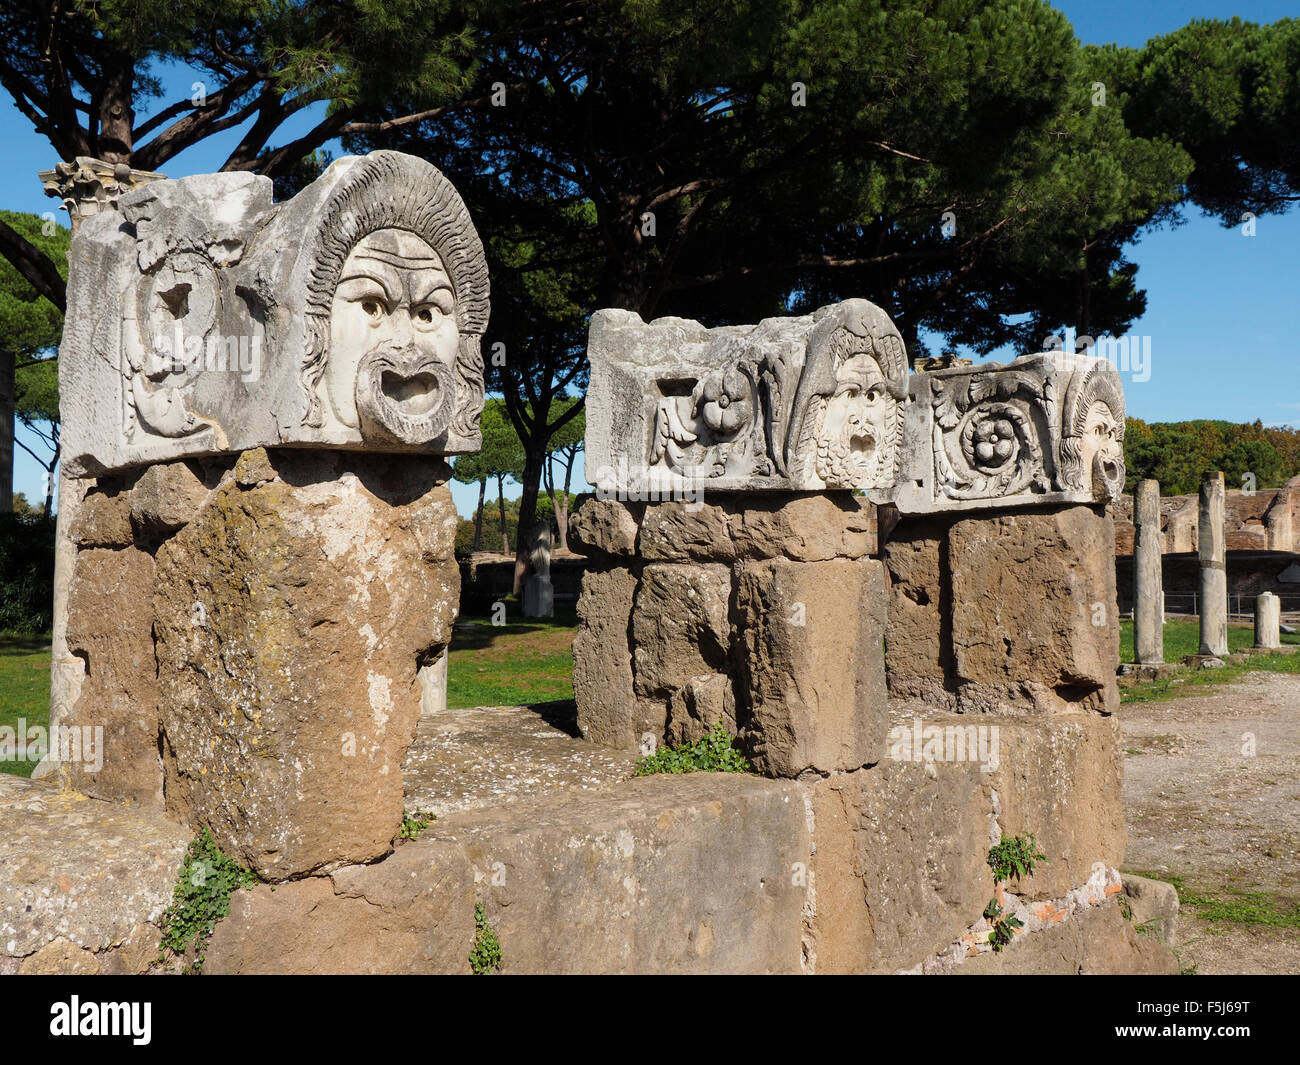 Ostia Antica, Roman sculpted faces masks at the theater. Excavation site near Rome, Italy Stock Photo